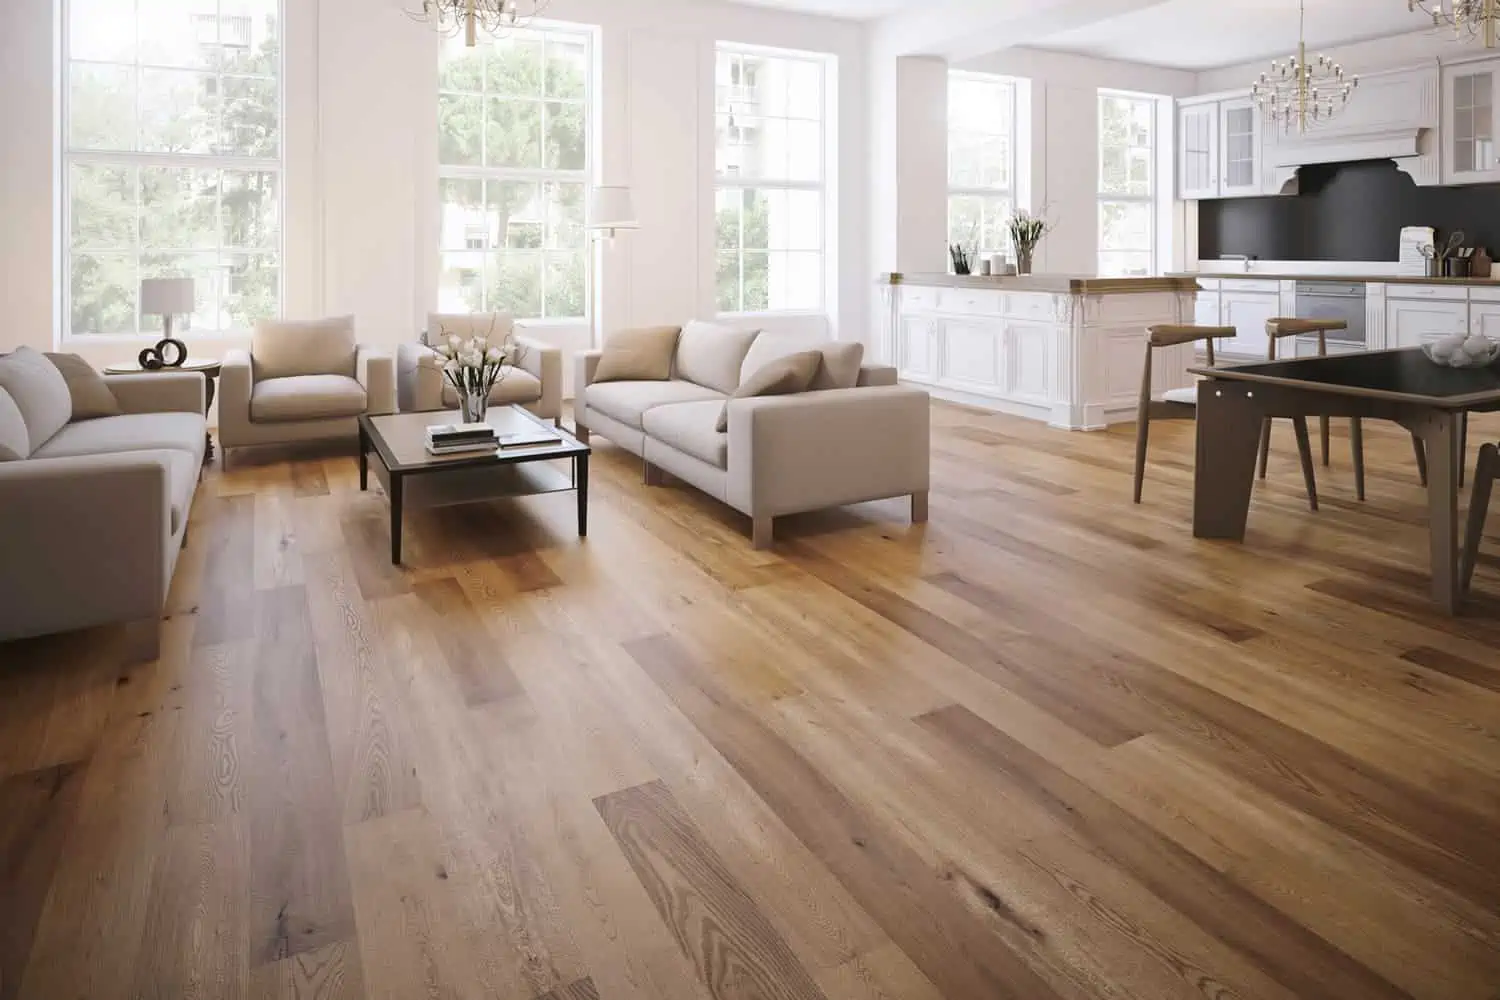 A detailed guide to timeless wood flooring (+Buying options)